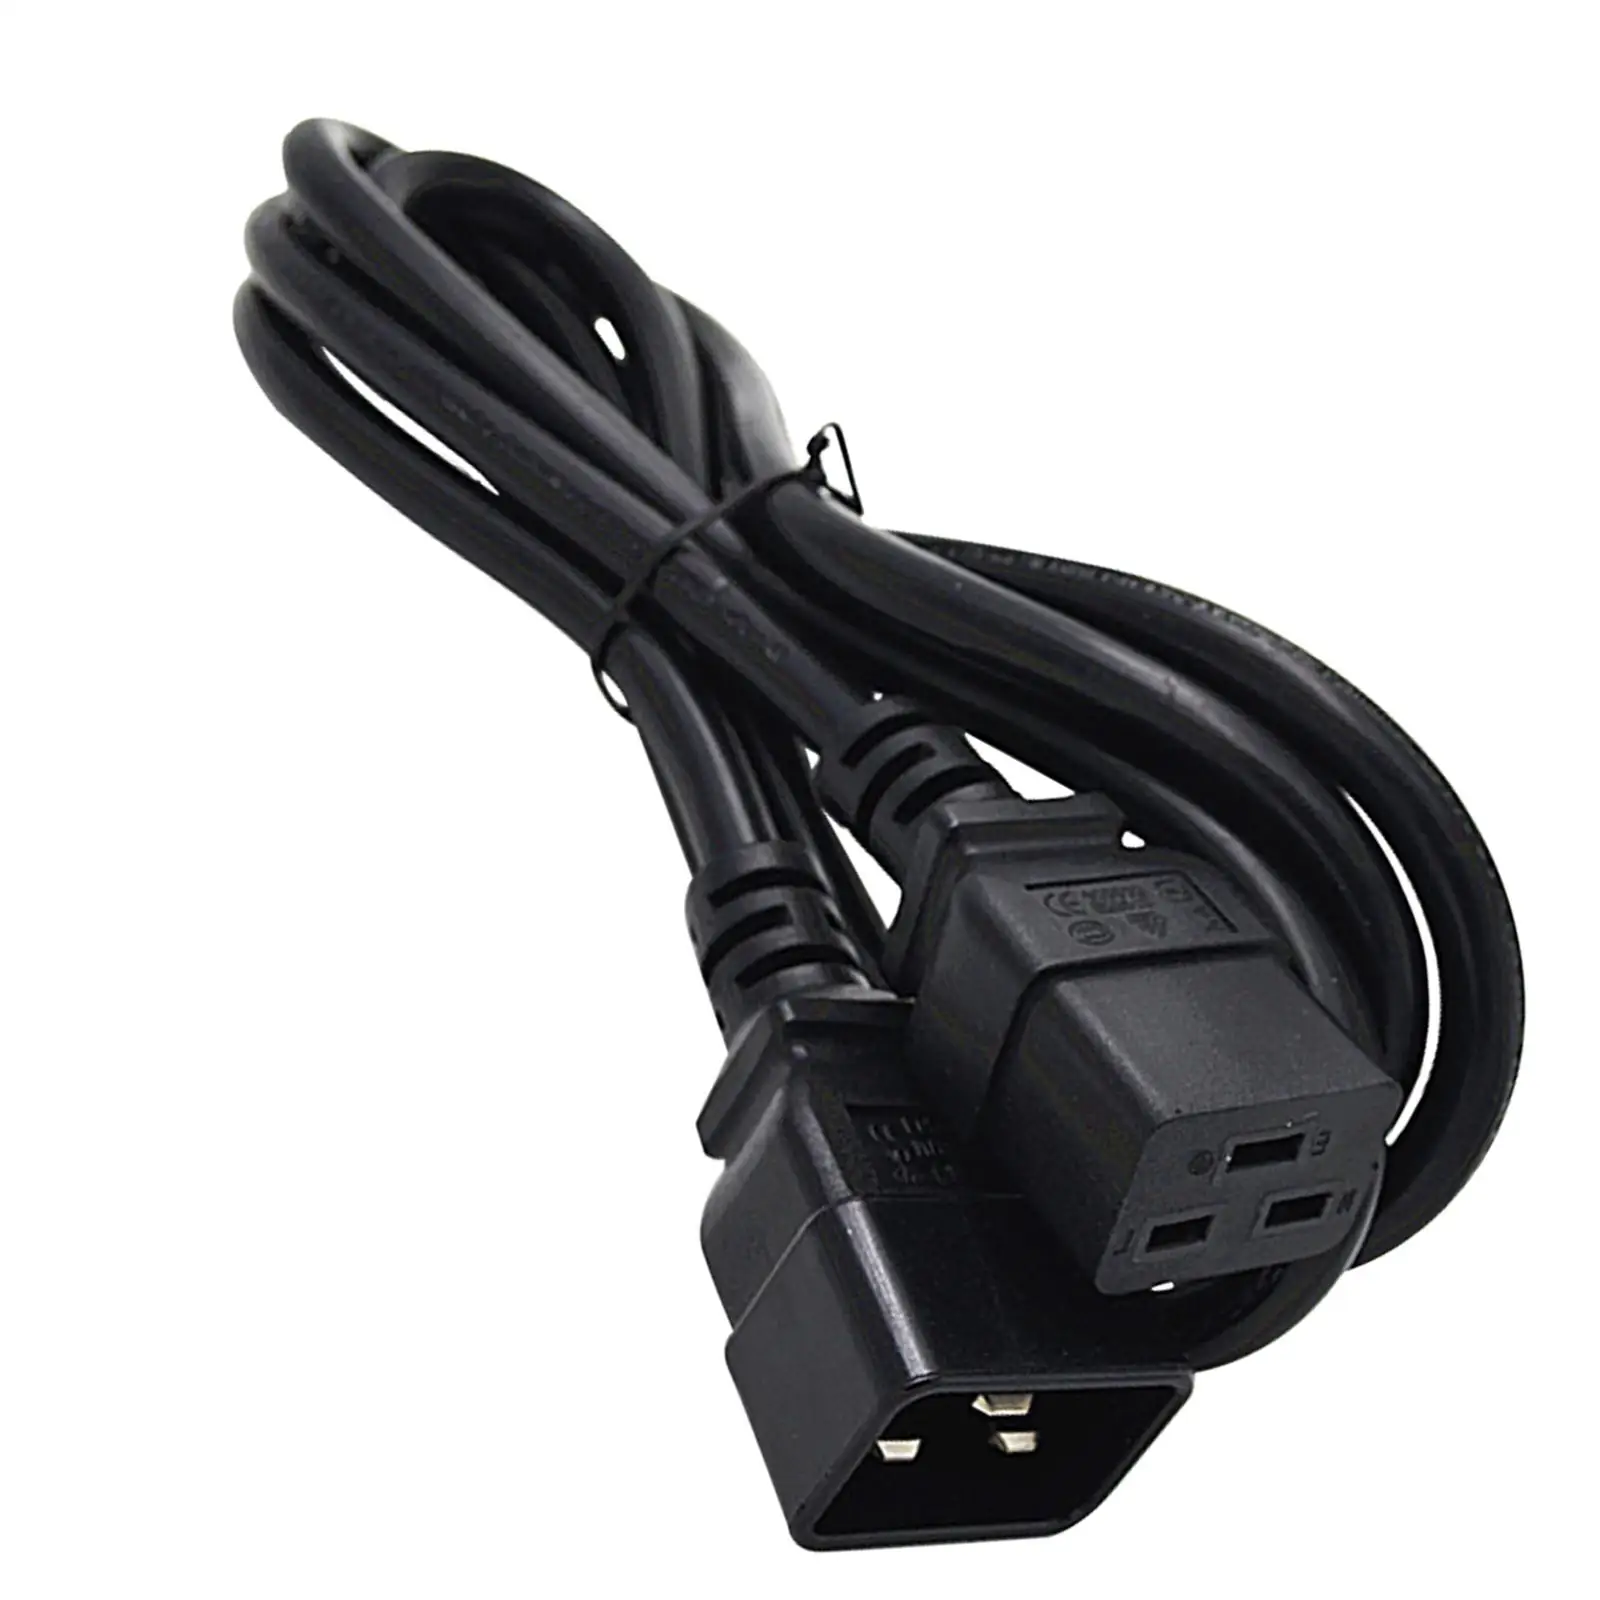 IEC320-C20 to IEC320-C19 Power Adapter Cord Universal Black Straight Rated Current 16A